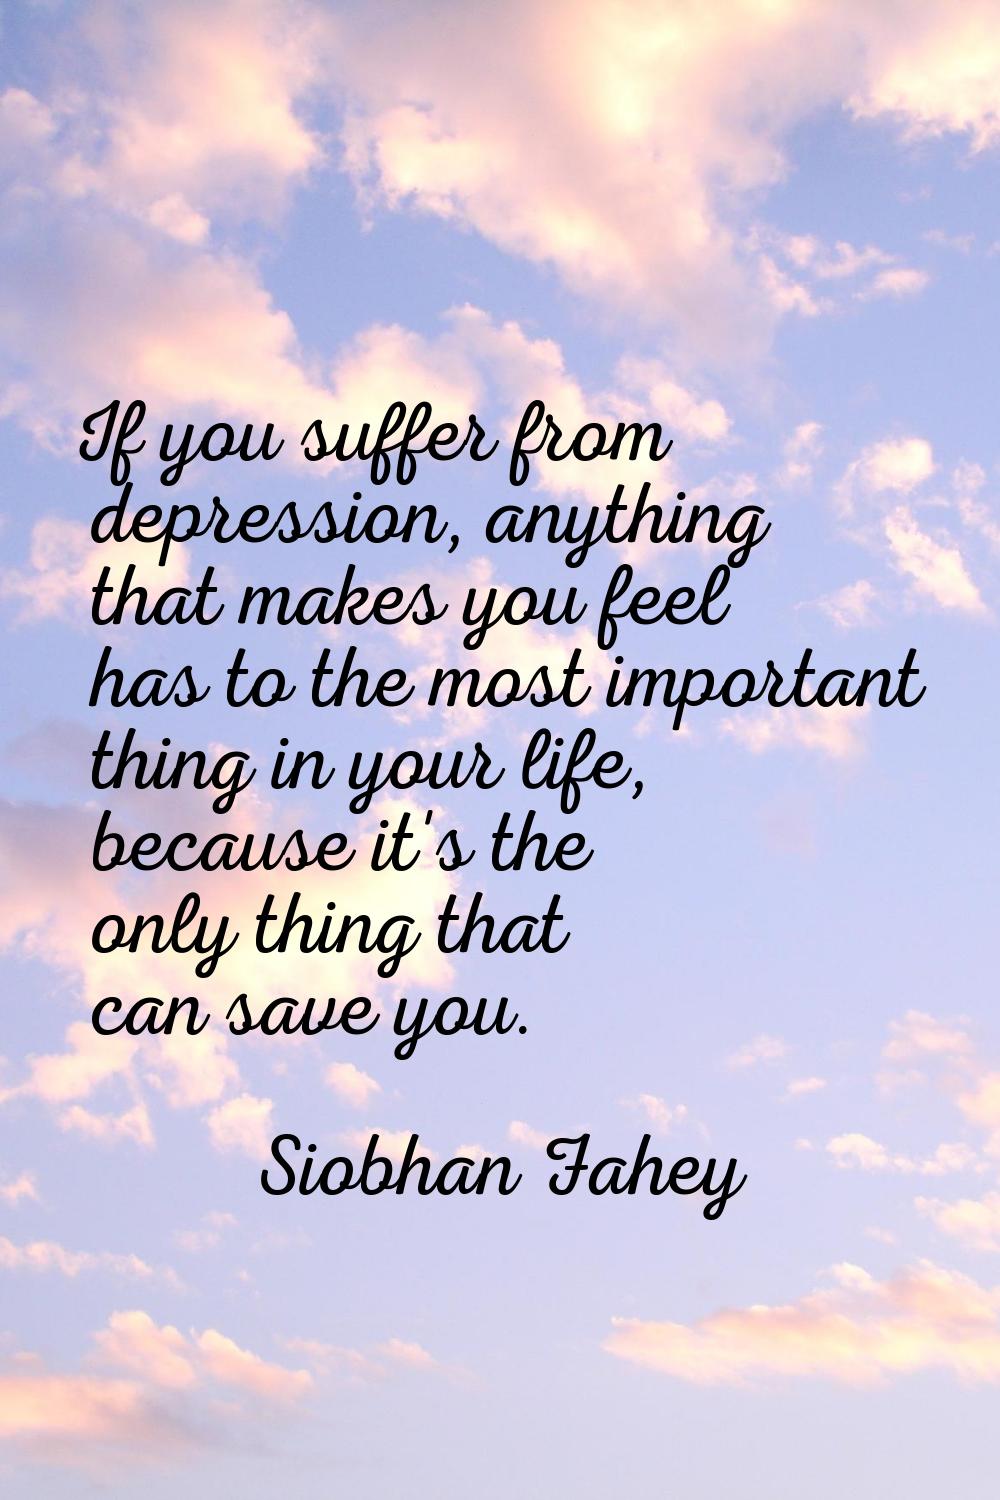 If you suffer from depression, anything that makes you feel has to the most important thing in your